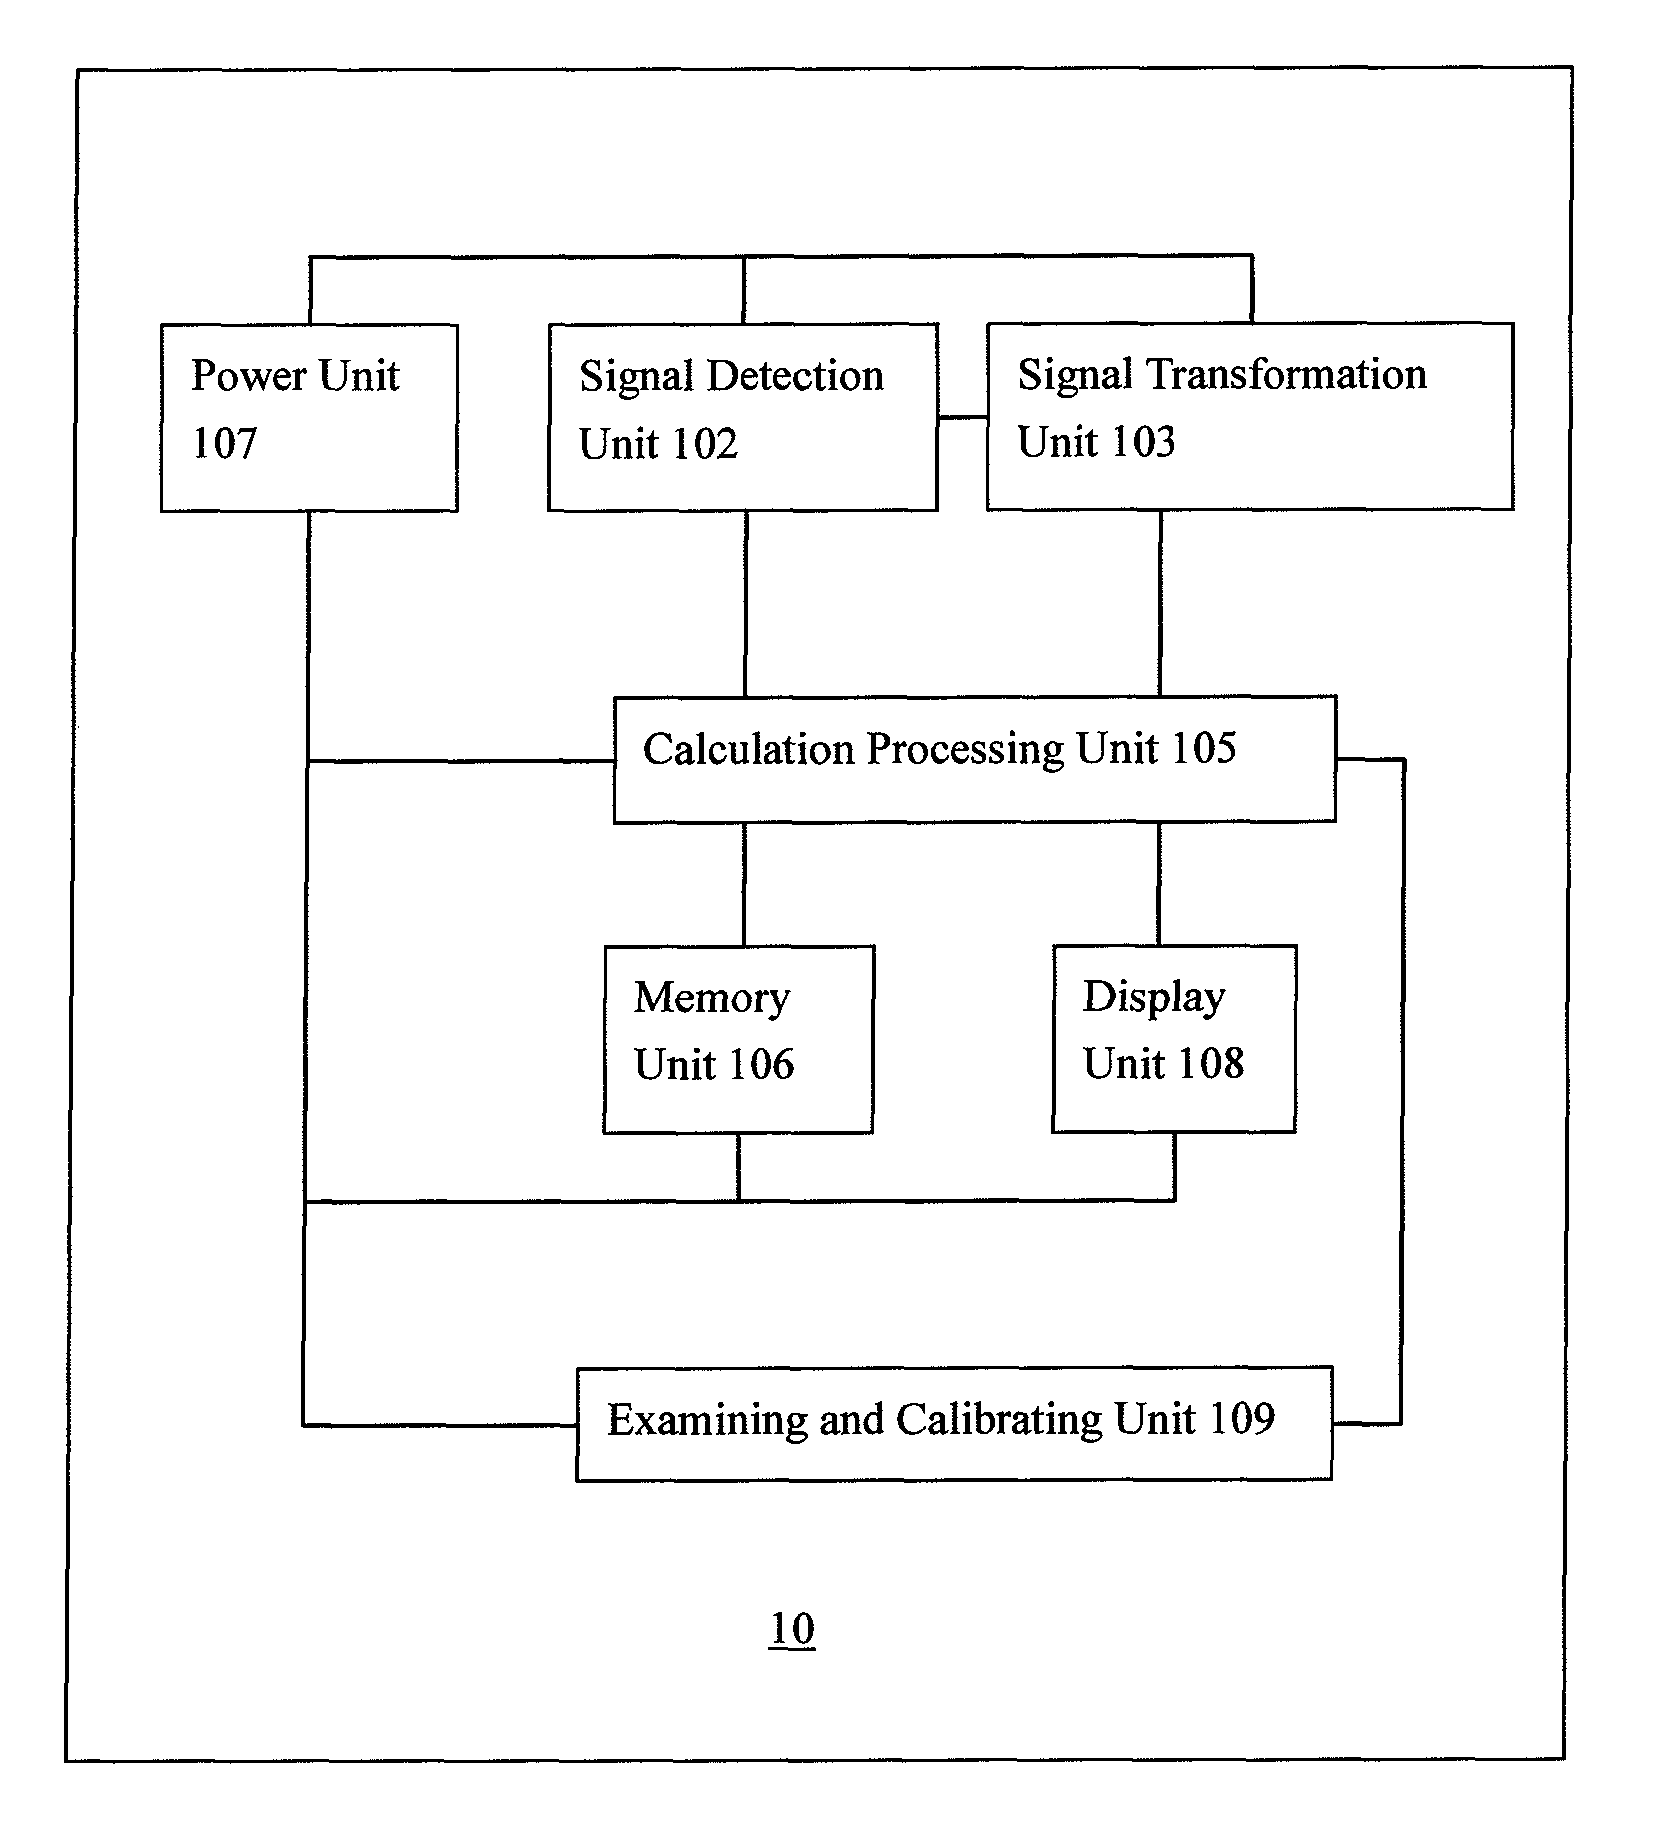 Blood pressure measuring device and system with automatic self-examination and self-calibration functions